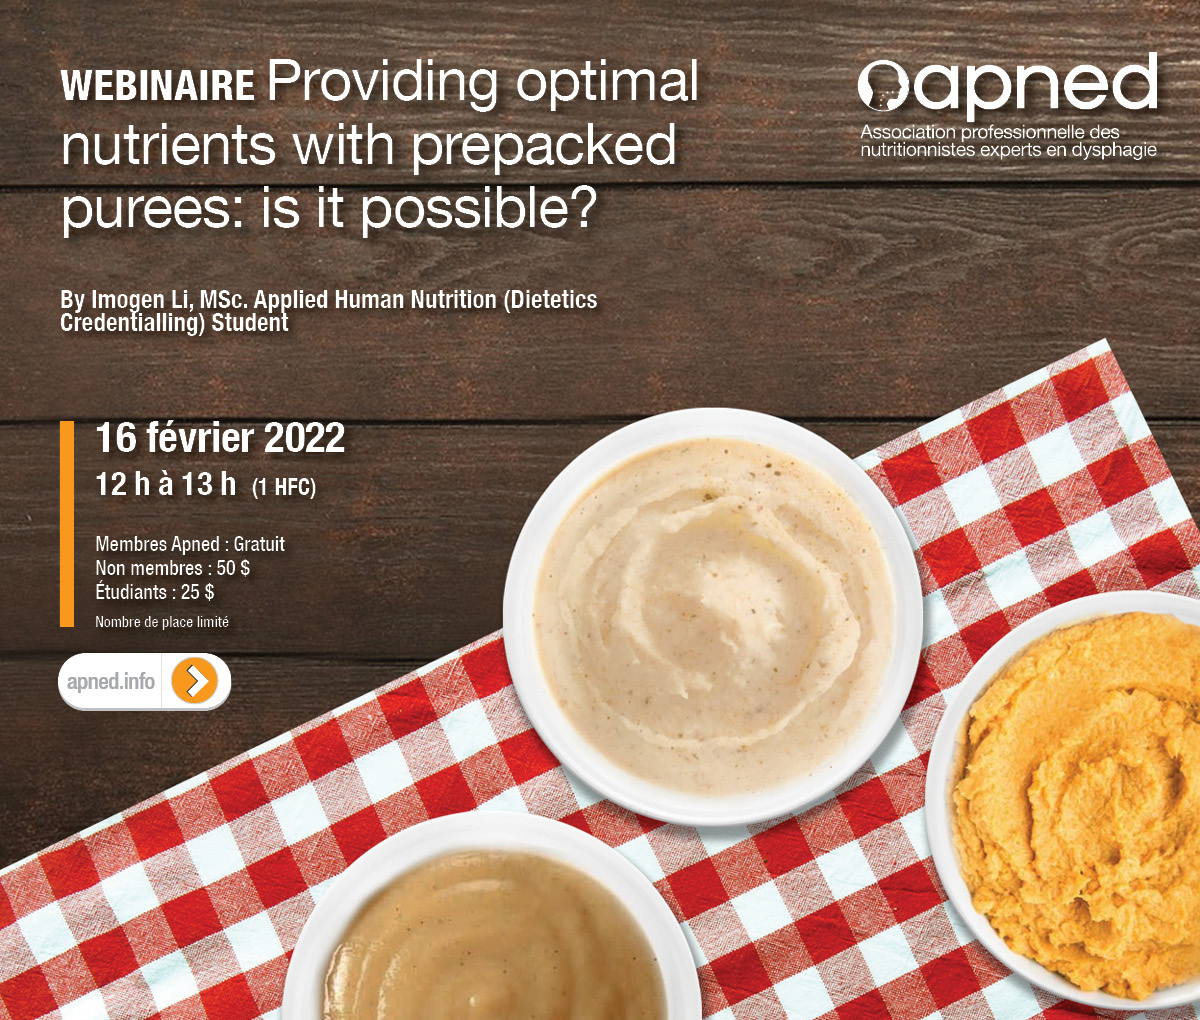 Webinaire 16 février 2022 – Providing optimal nutrients with prepacked purees: is it possible?